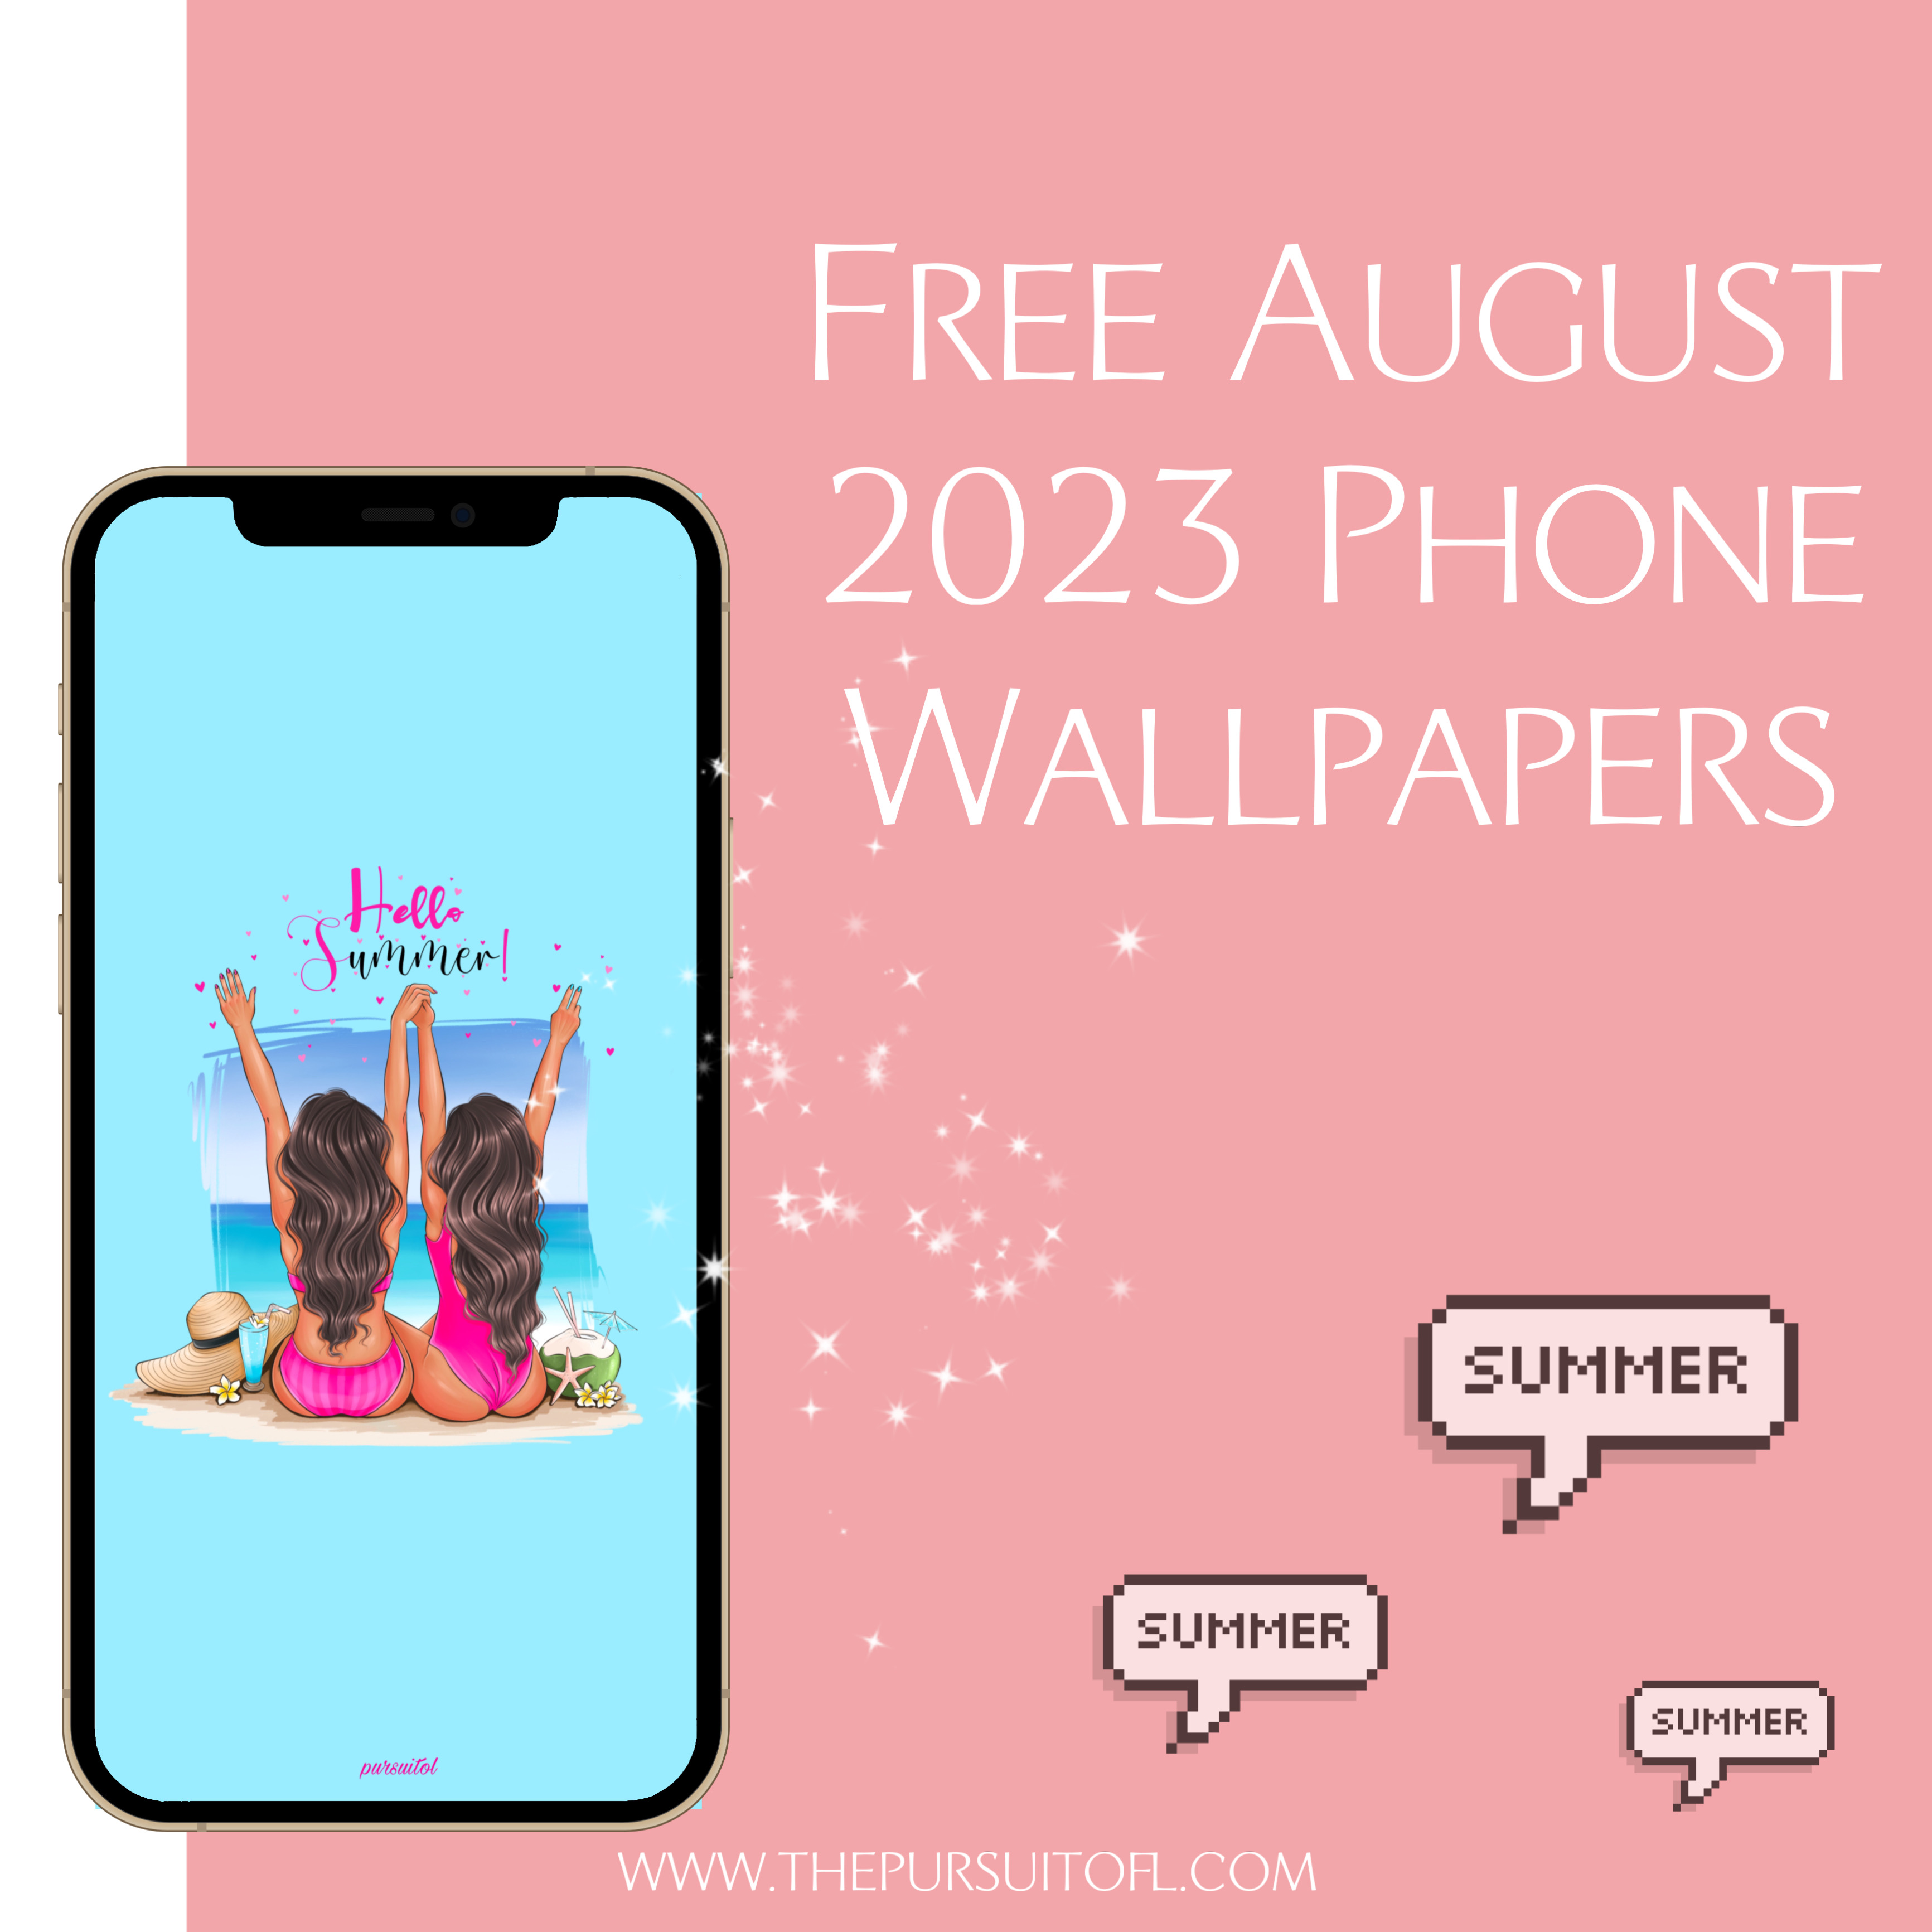 Free August 2023 Phone Wallpapers, The Pursuit of L